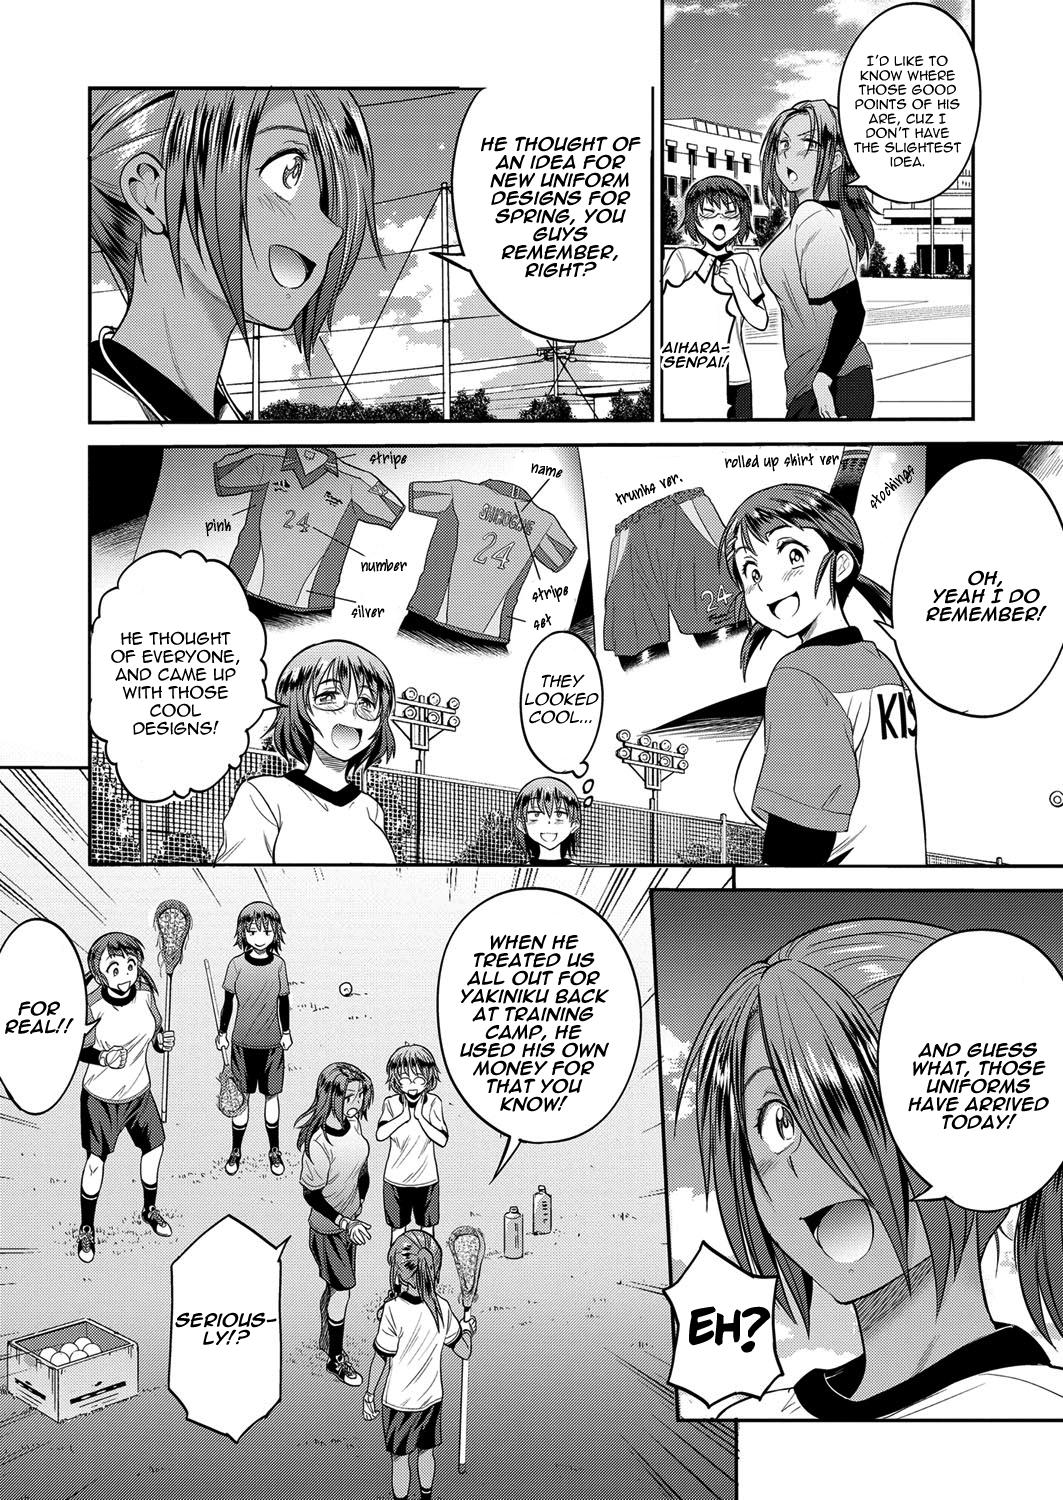 Rough Sex [DISTANCE] Joshi Lacu! - Girls Lacrosse Club ~2 Years Later~ Ch. 1.5 (COMIC ExE 06) [English] [TripleSevenScans] [Digital] Fucking Hard - Page 2